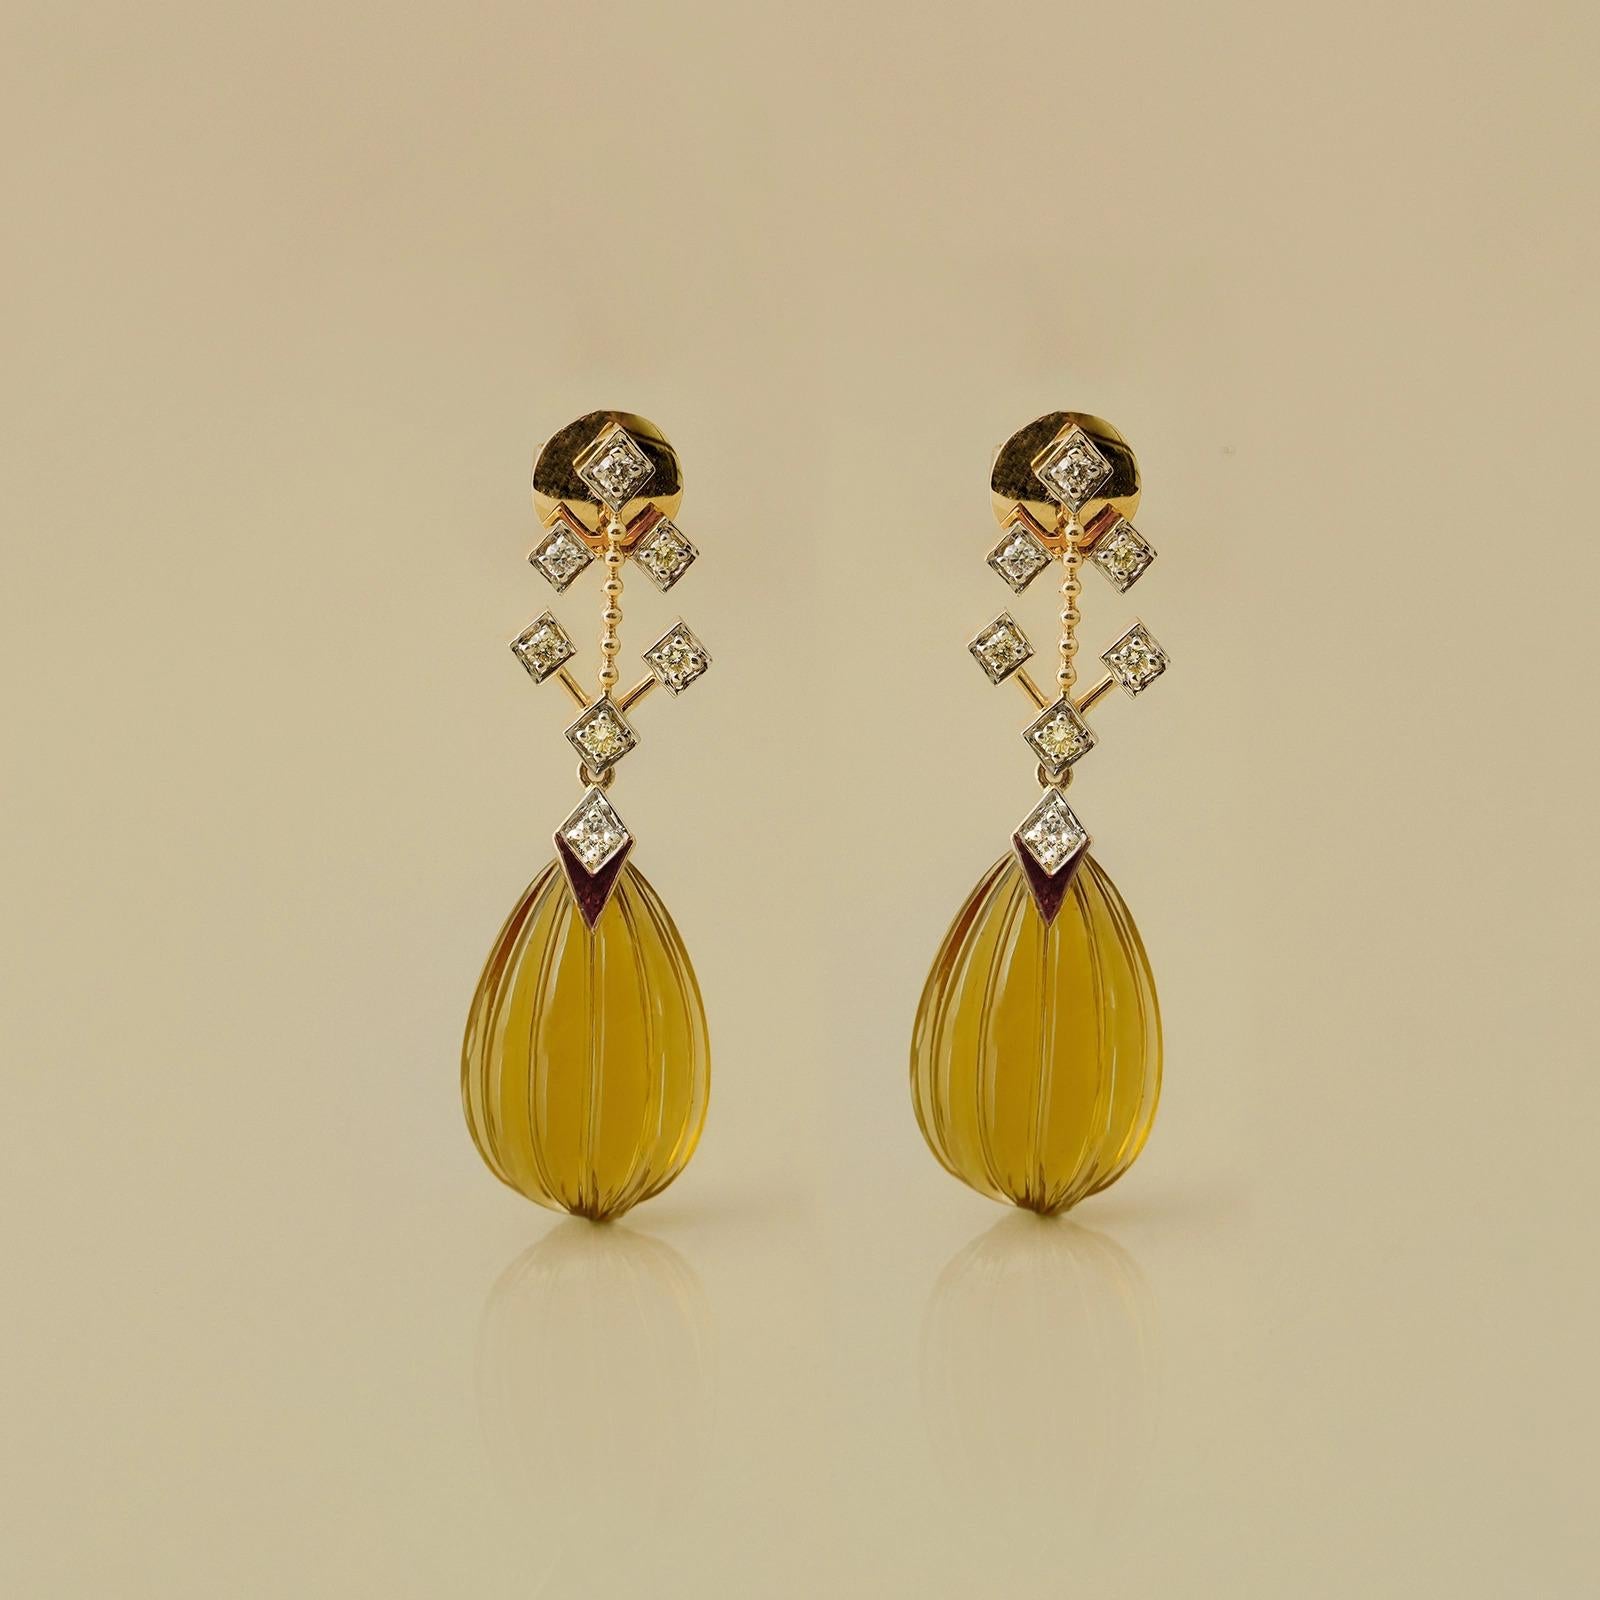 Moi Elsa Diamond and Quartz Drop Earrings In New Condition For Sale In Lawrenceville, GA